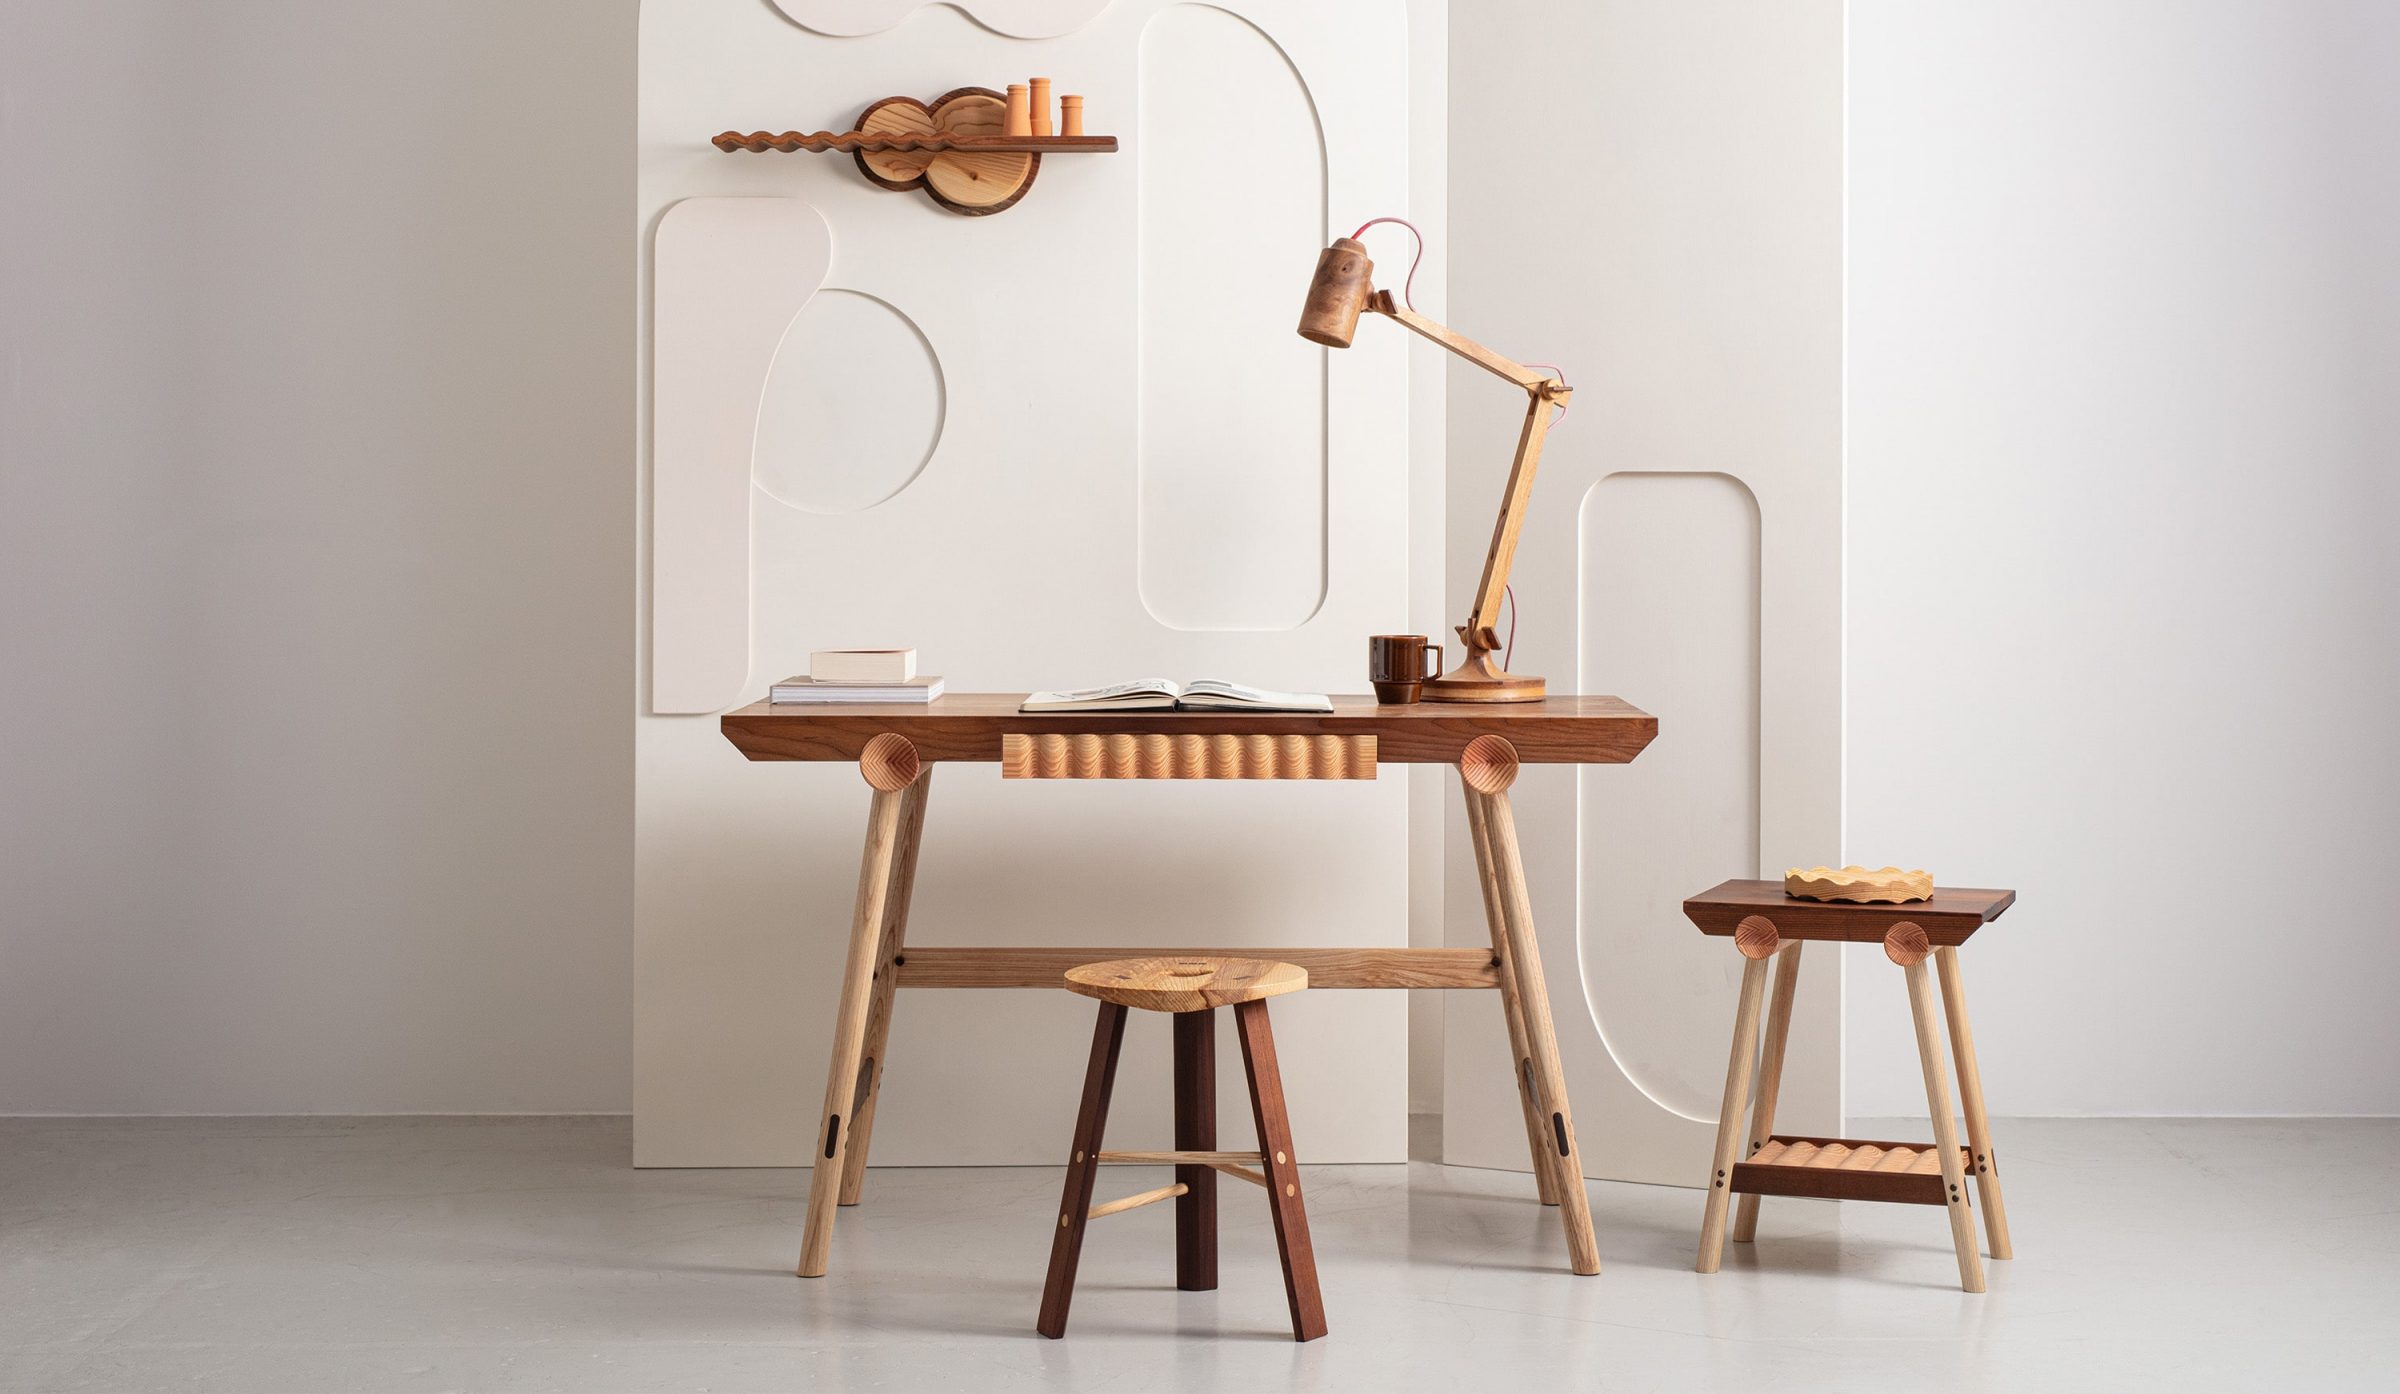 Jan Hendzel Studio Bowater range new collection with english baked ash and sycamore2 crop 3-min